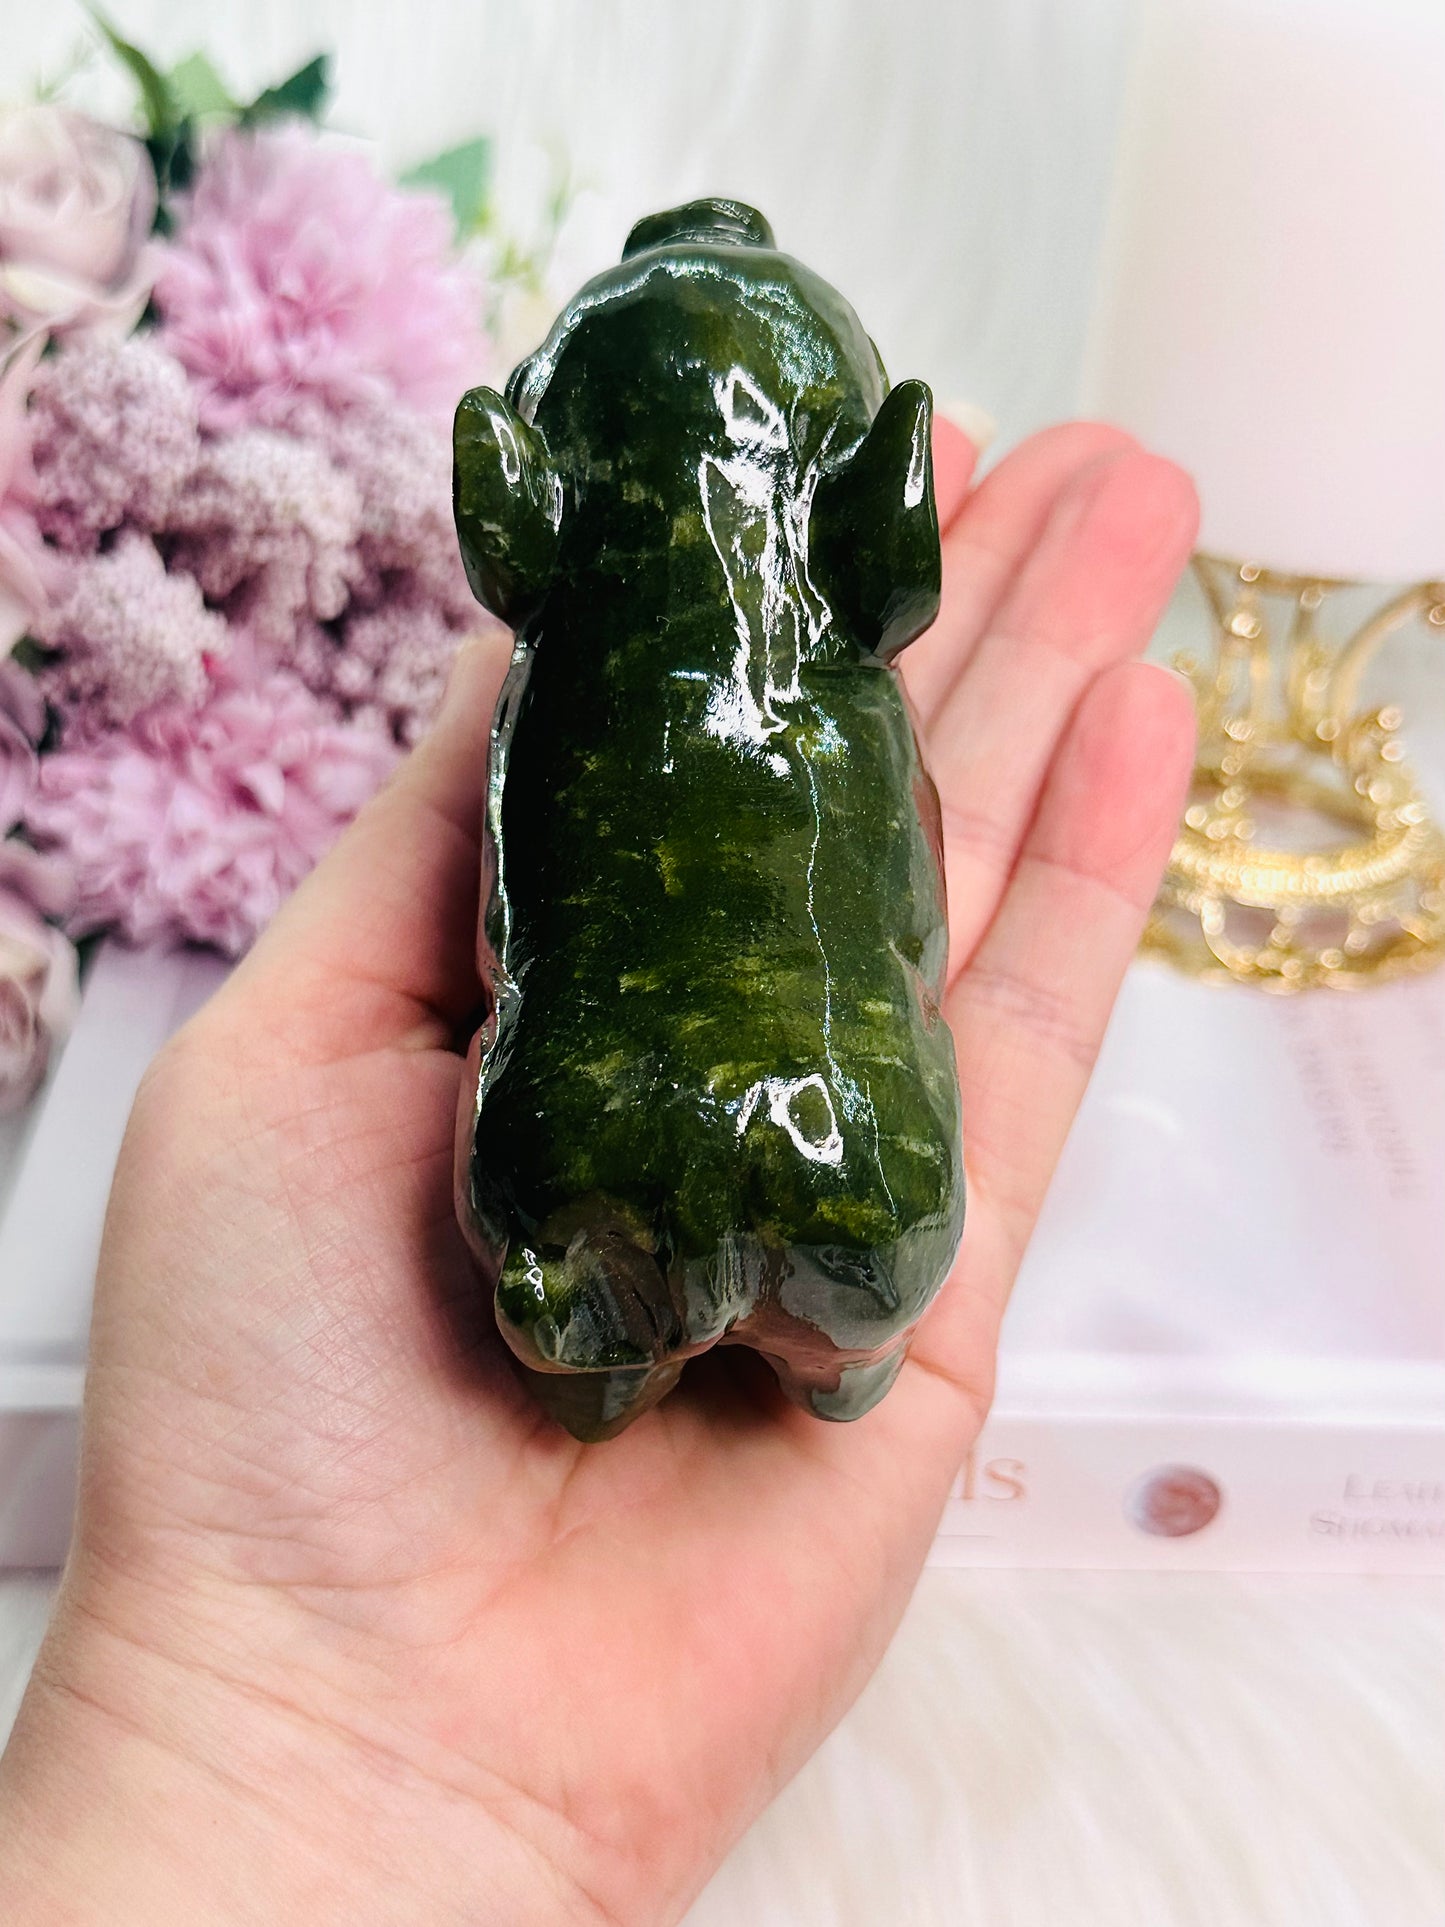 My Happy Girl!!! Beautiful Large Green Jade Carved Chunky Pig